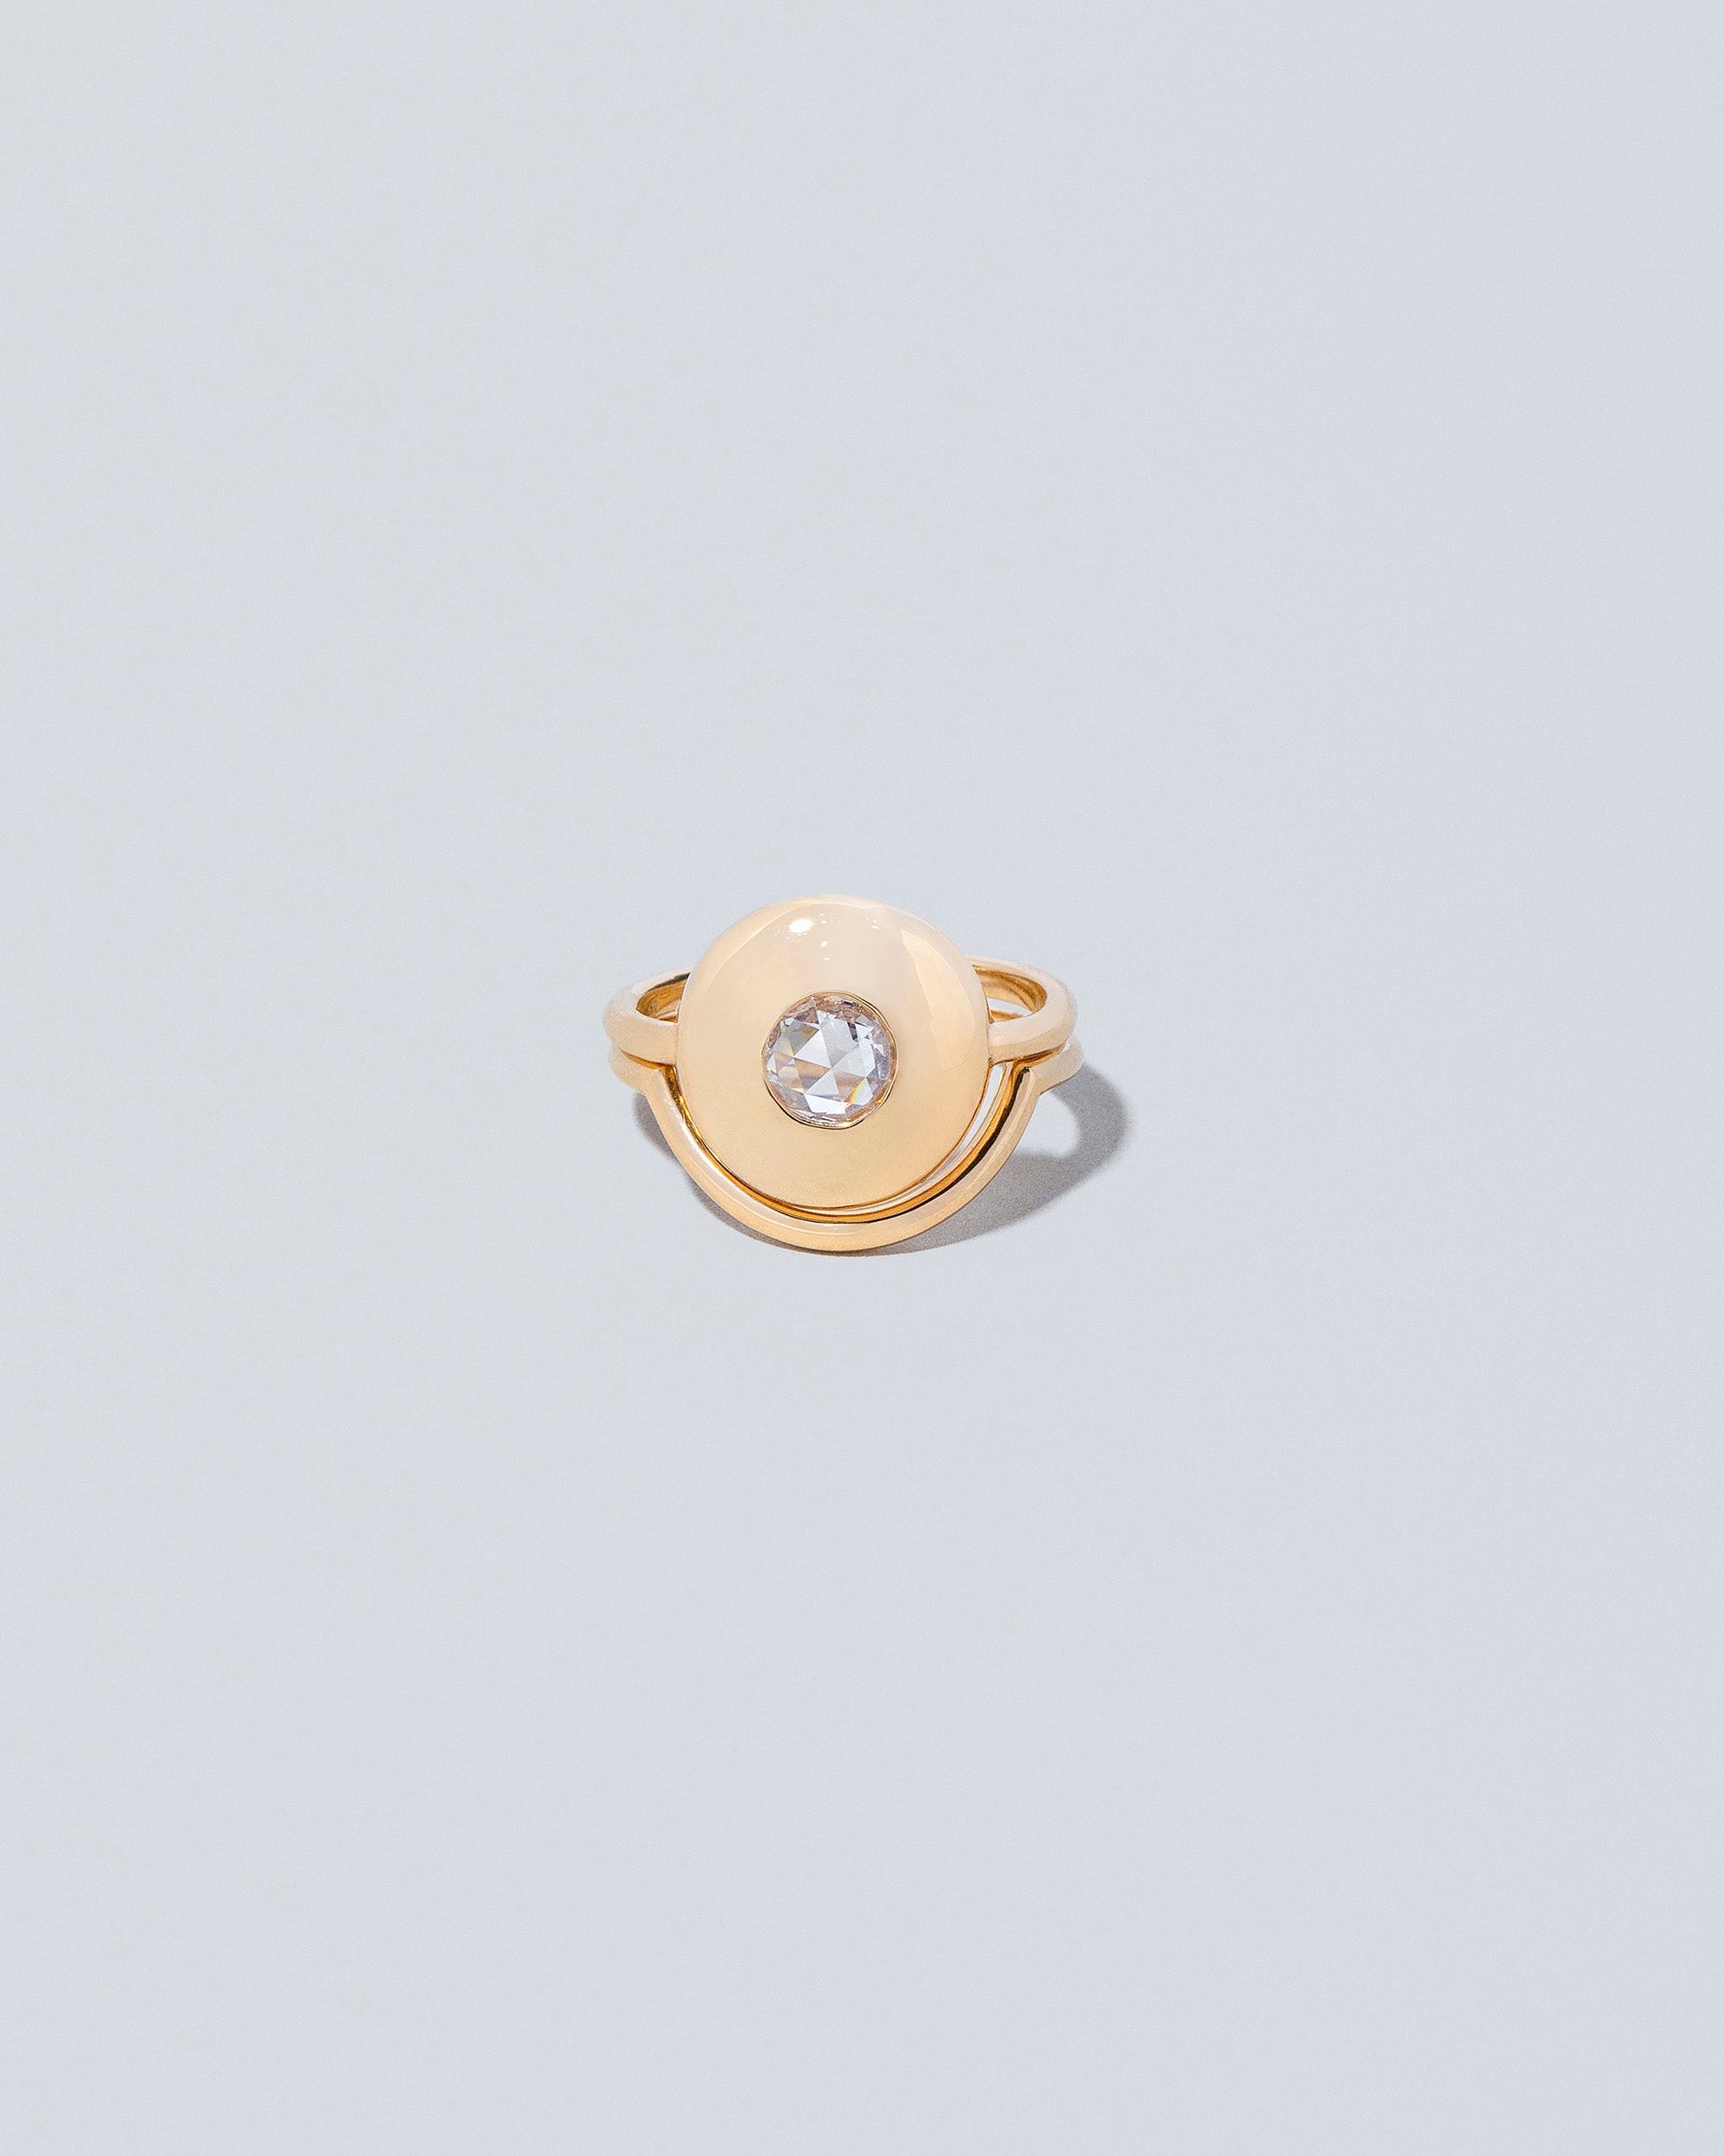 Front view of Petite Exposition Ring with Exposition Band on light color background.